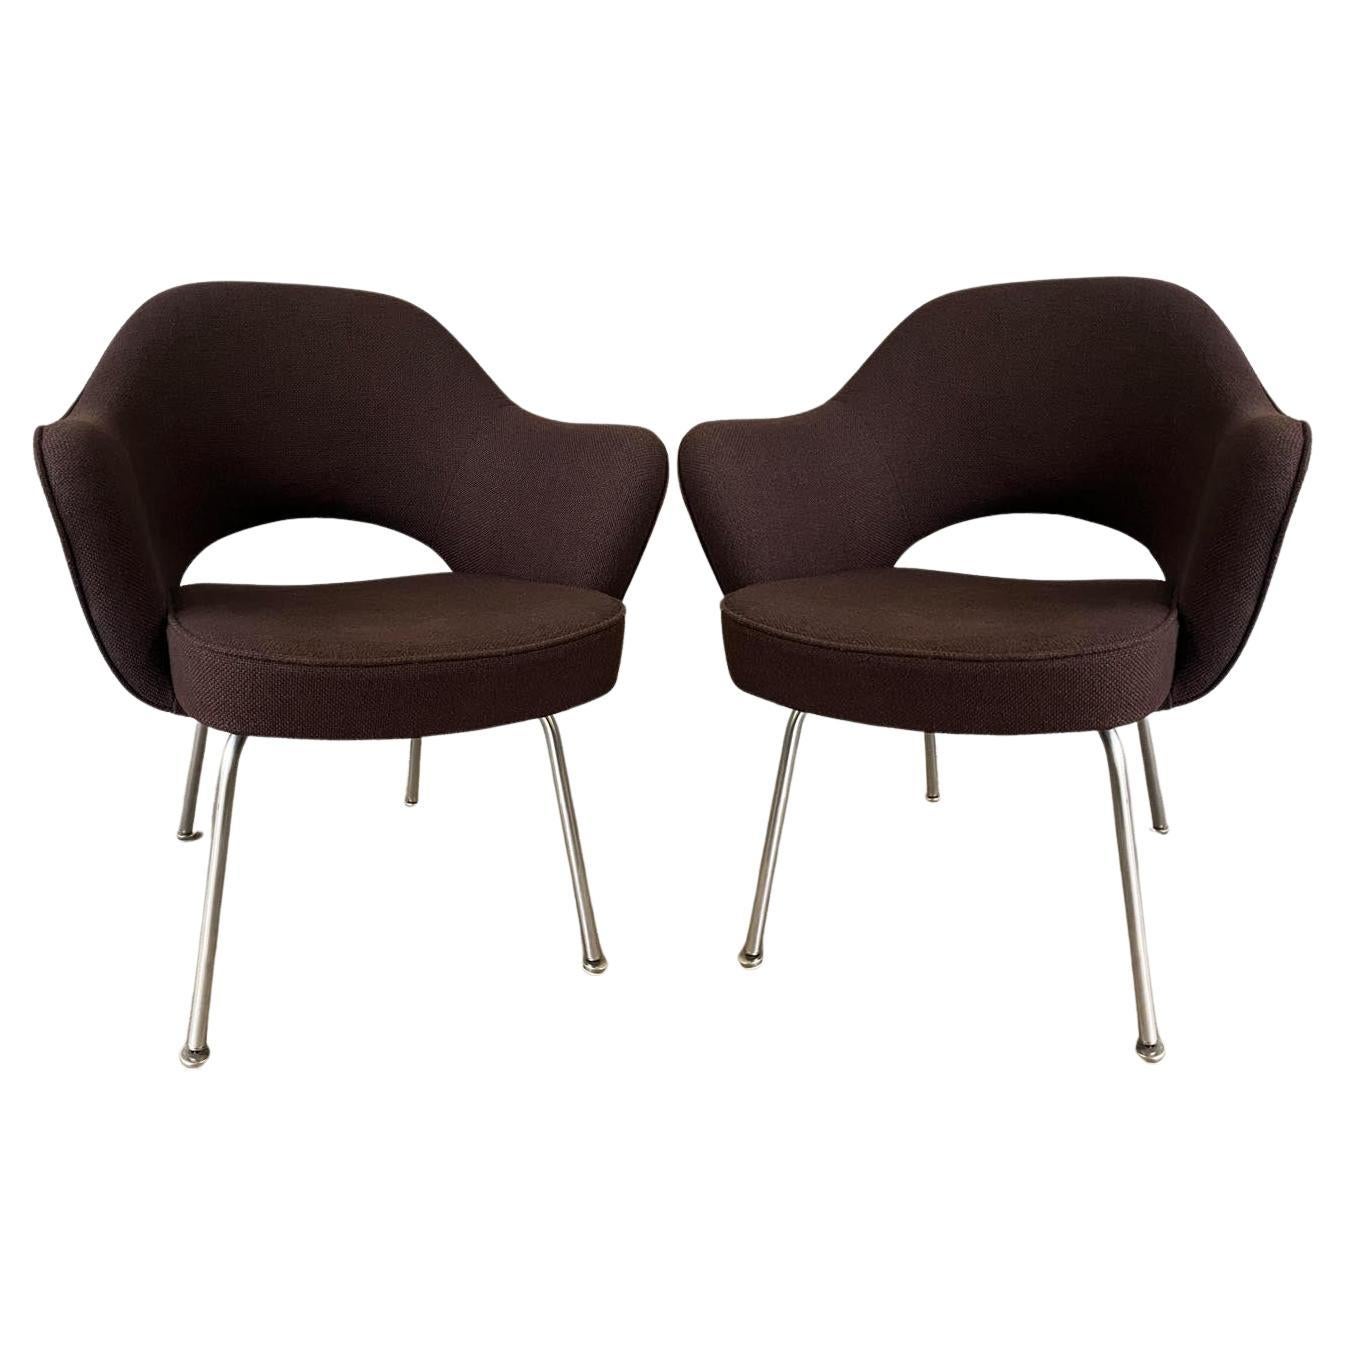 Pair of Brown Saarinen Executive / Dining Chairs or Knoll  For Sale